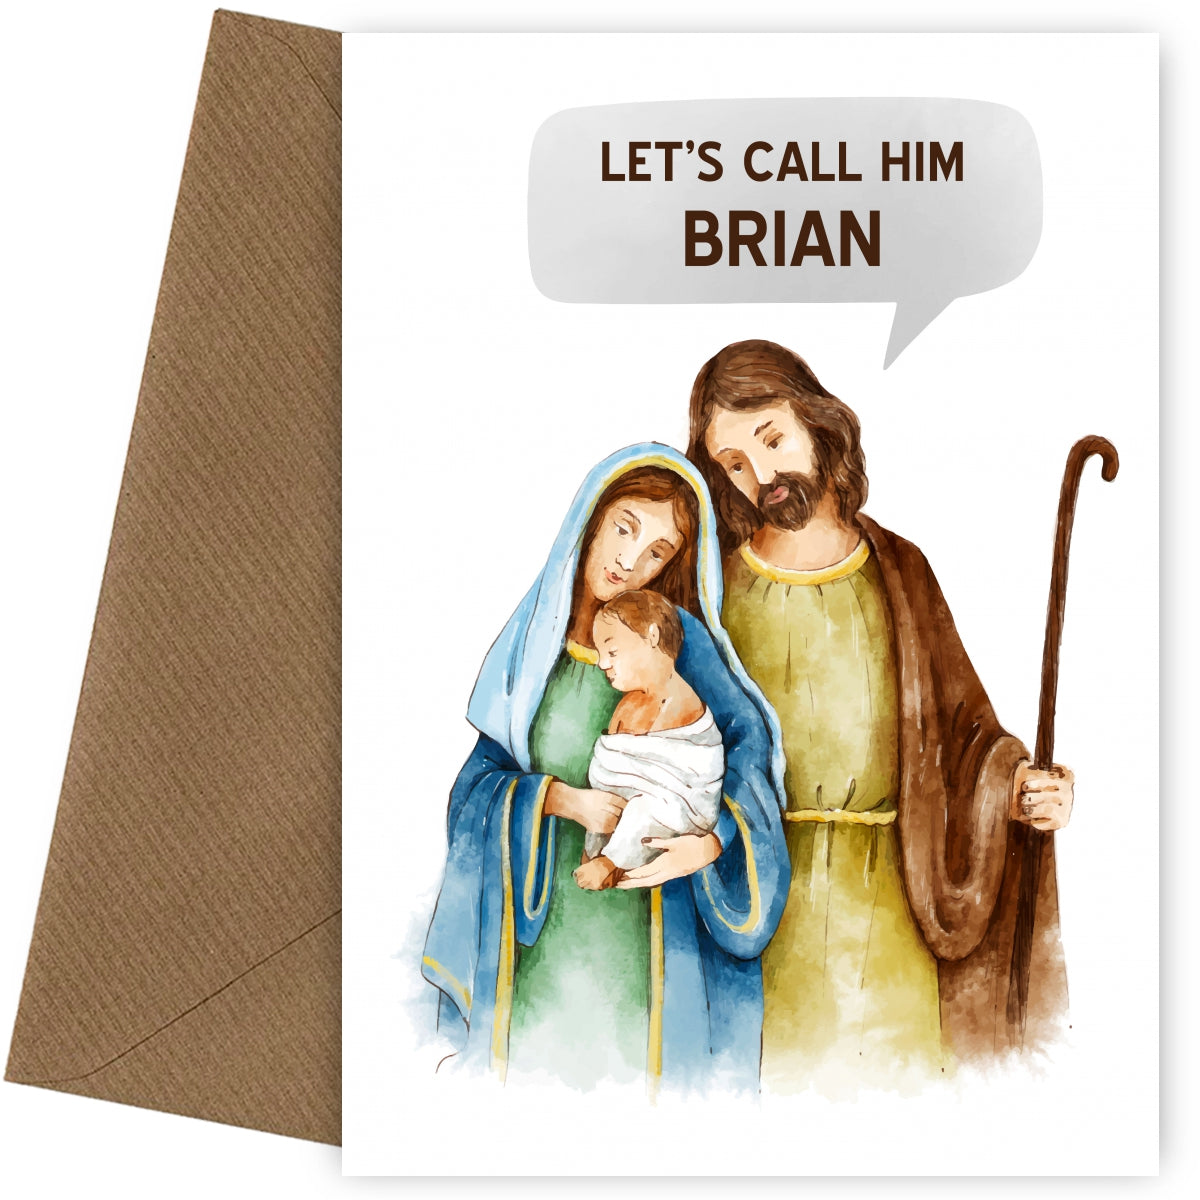 Funny Christmas Card for Friends - Religious Card - Let's Call Him Brian!